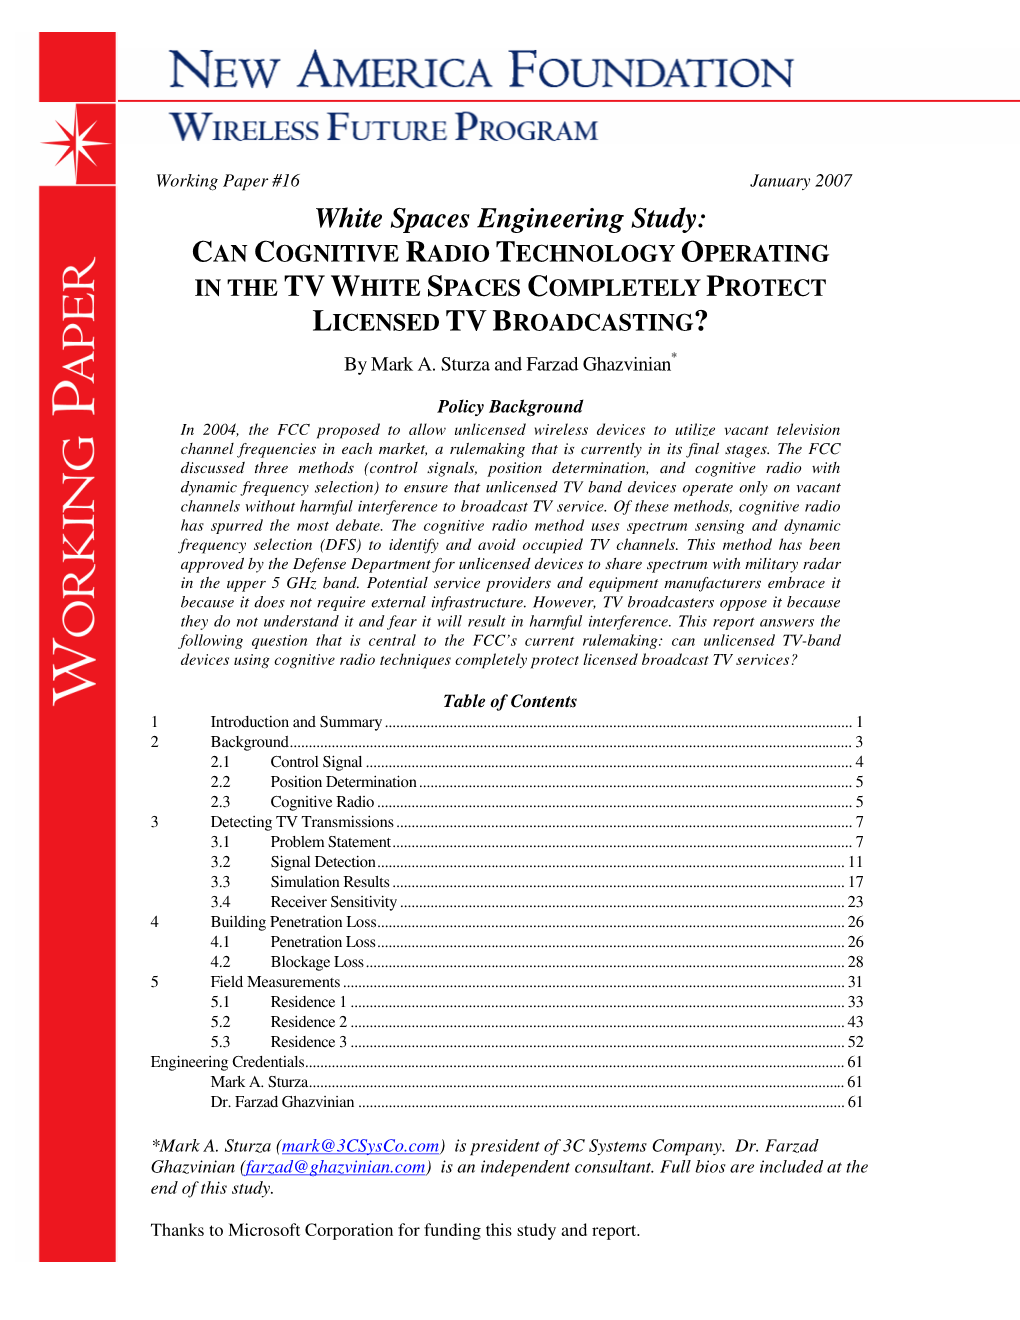 White Spaces Engineering Study: CAN COGNITIVE RADIO TECHNOLOGY OPERATING in the TV WHITE SPACES COMPLETELY PROTECT LICENSED TV BROADCASTING ?